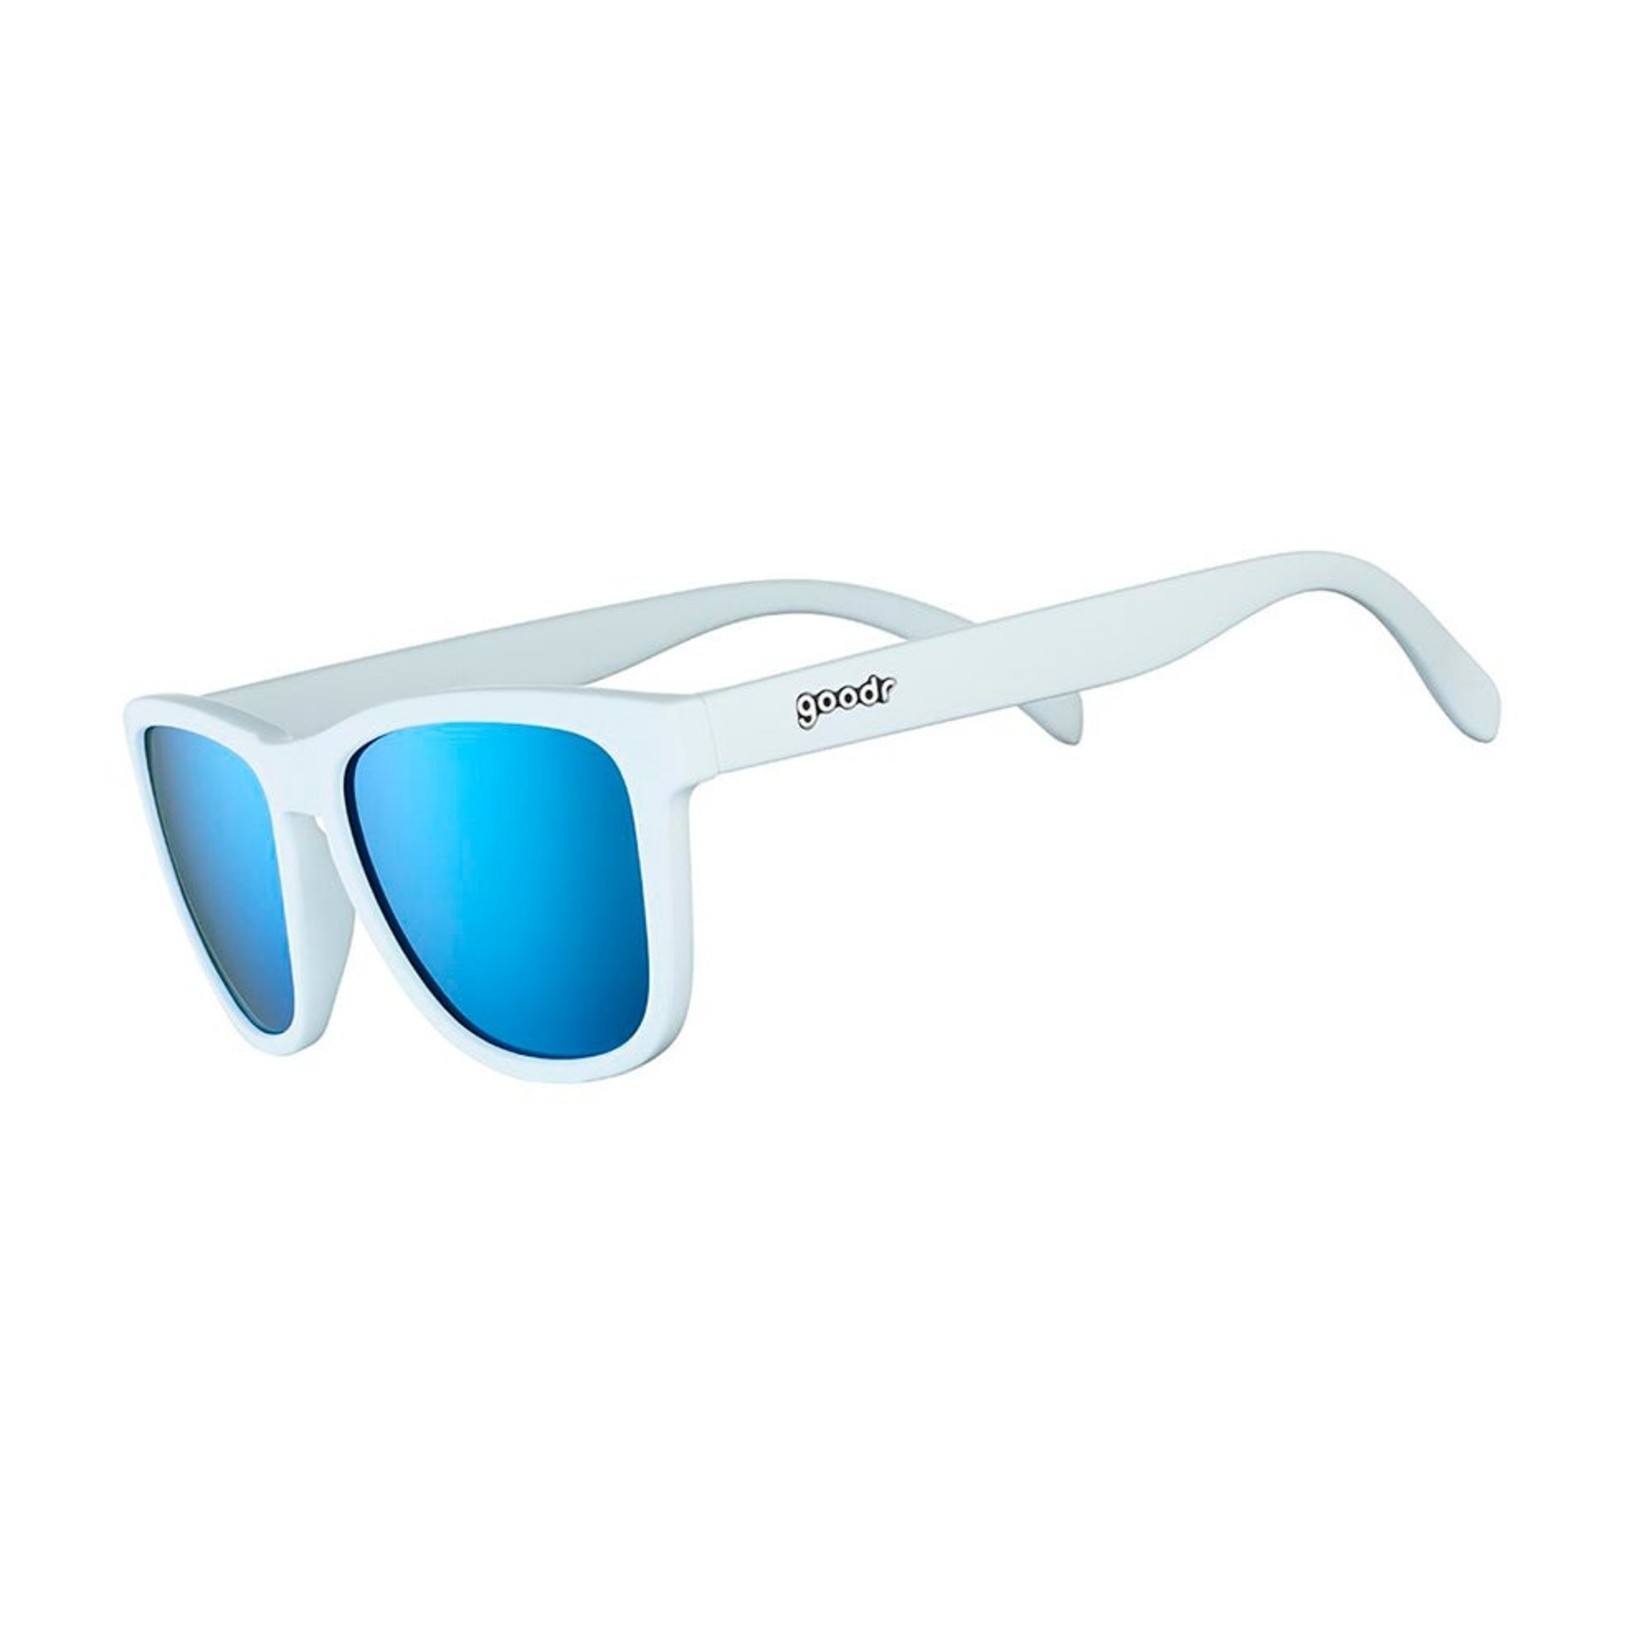 goodr goodr THE OGs Polarized Sunglasses Iced by Yetis